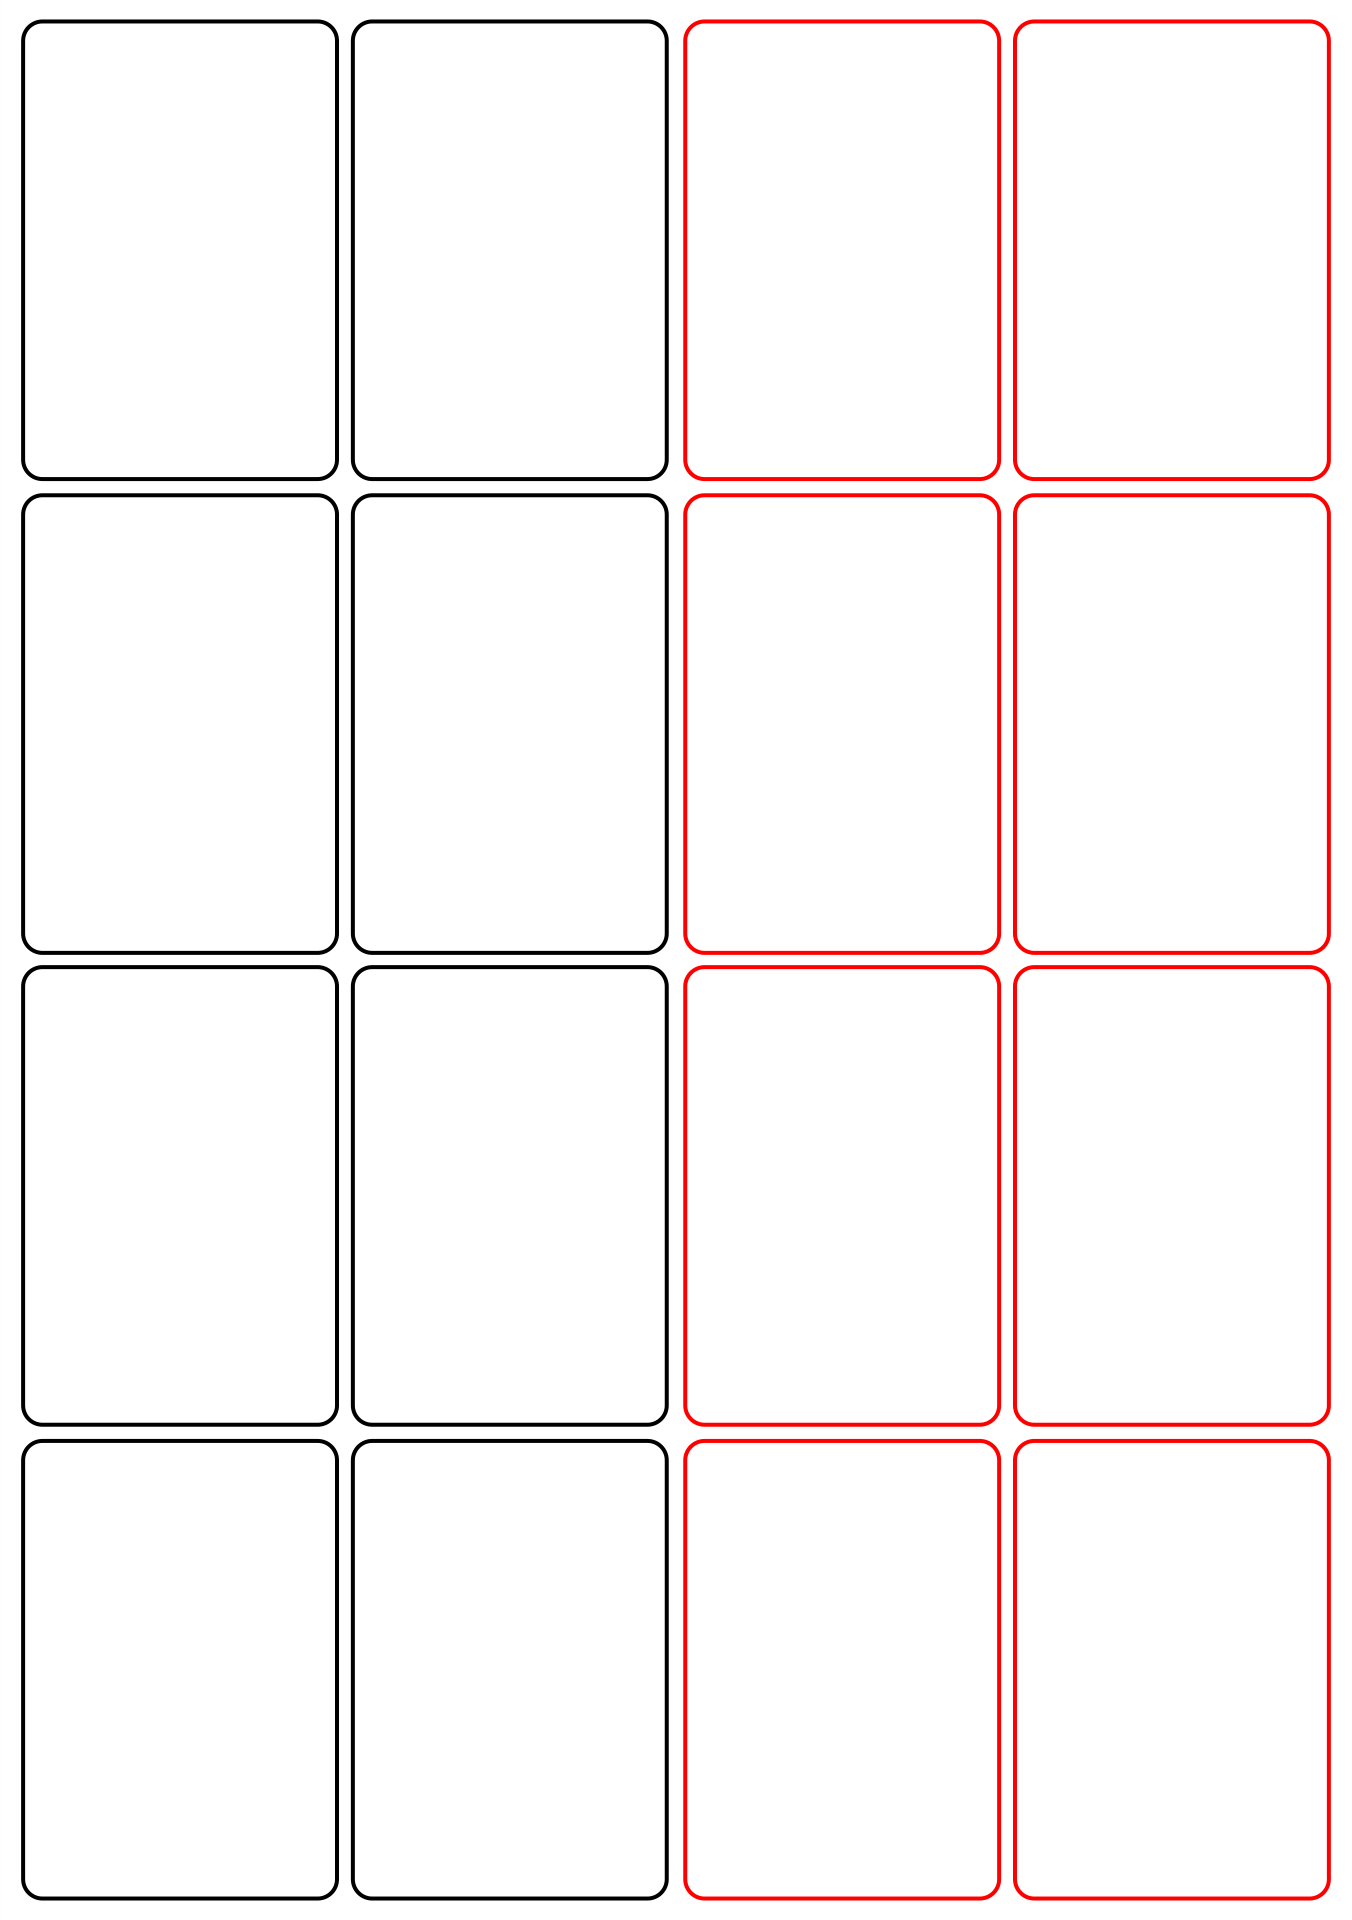 8-best-images-of-blank-playing-card-printable-template-for-word-blank